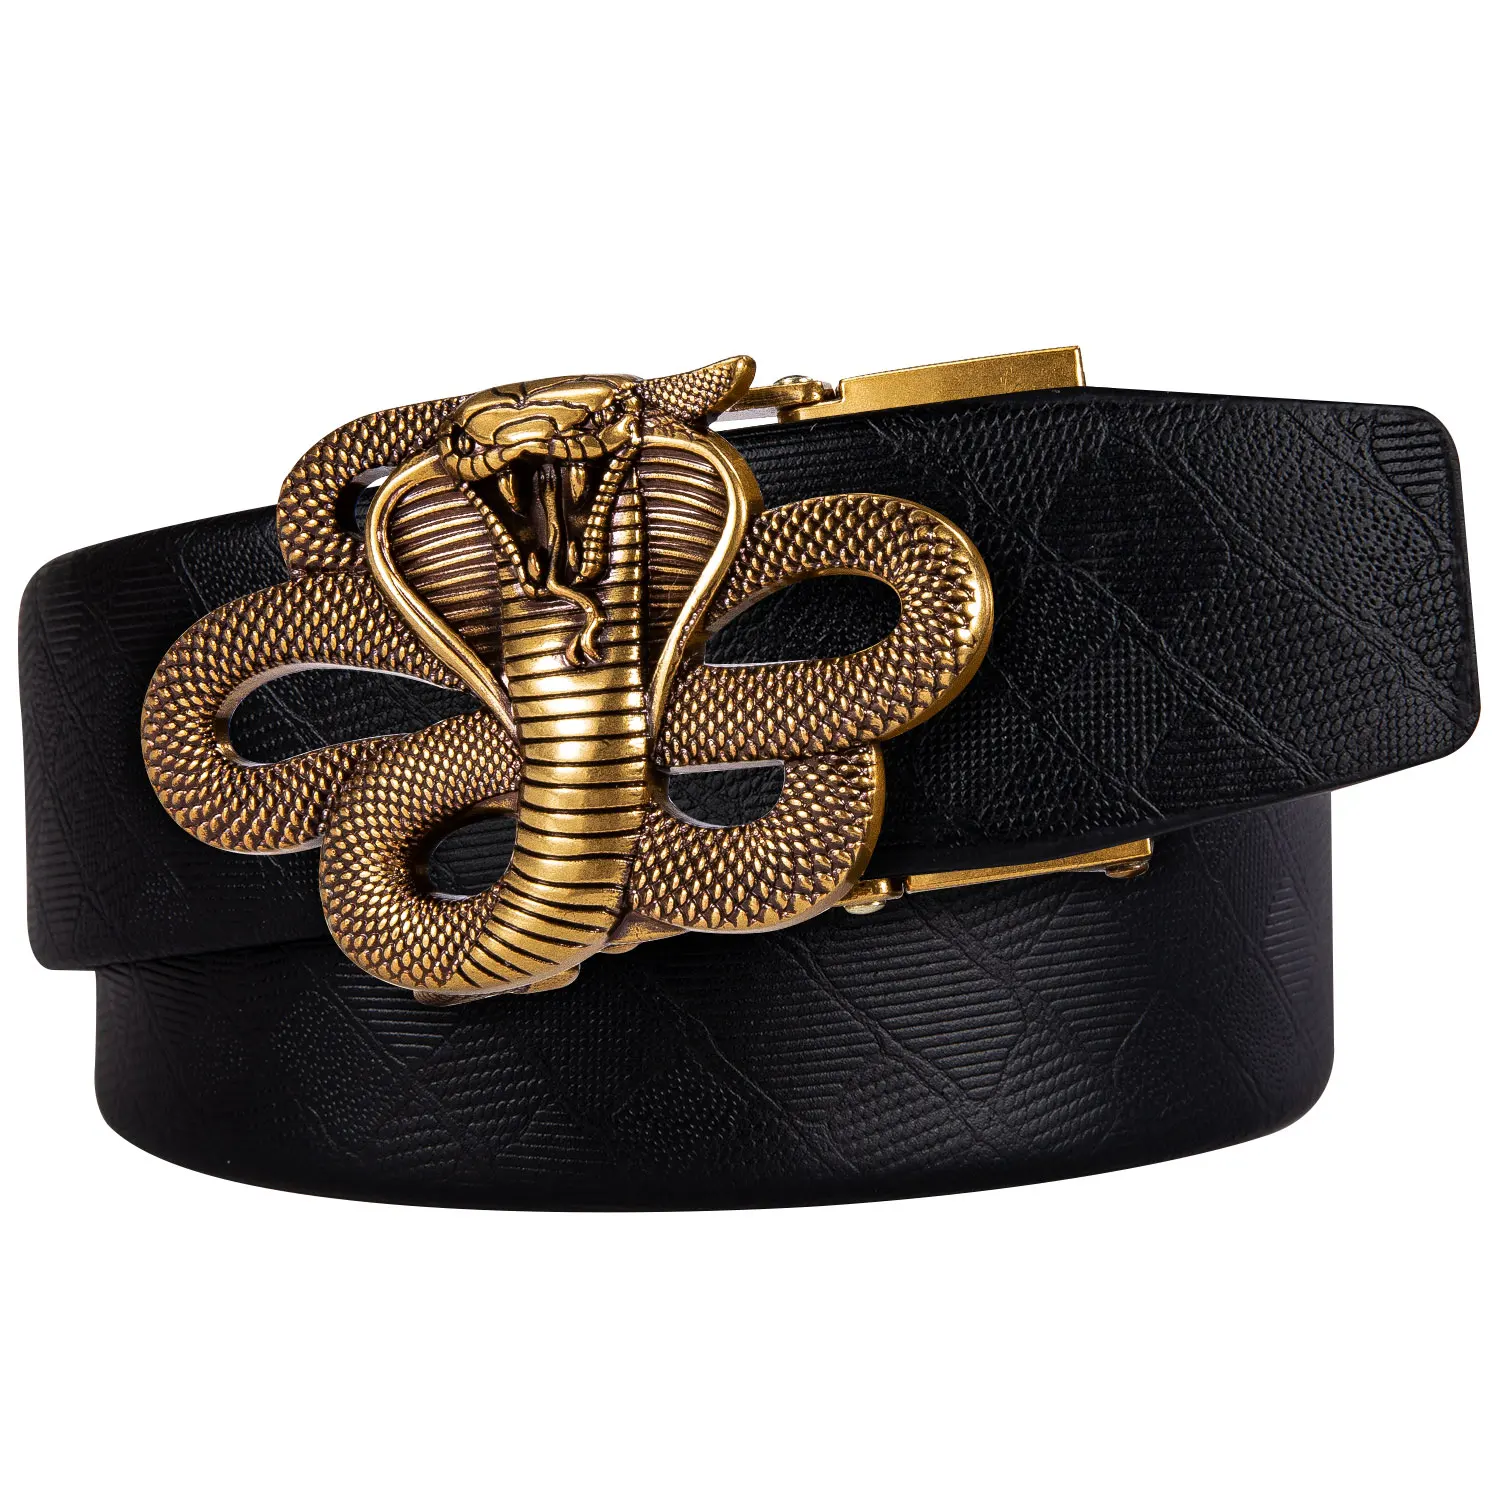 

Luxury Belt for Men Black Leather Gold Snake Automatic Rachat Buckle Alloy Cowskin Waistband Straps Barry.Wang